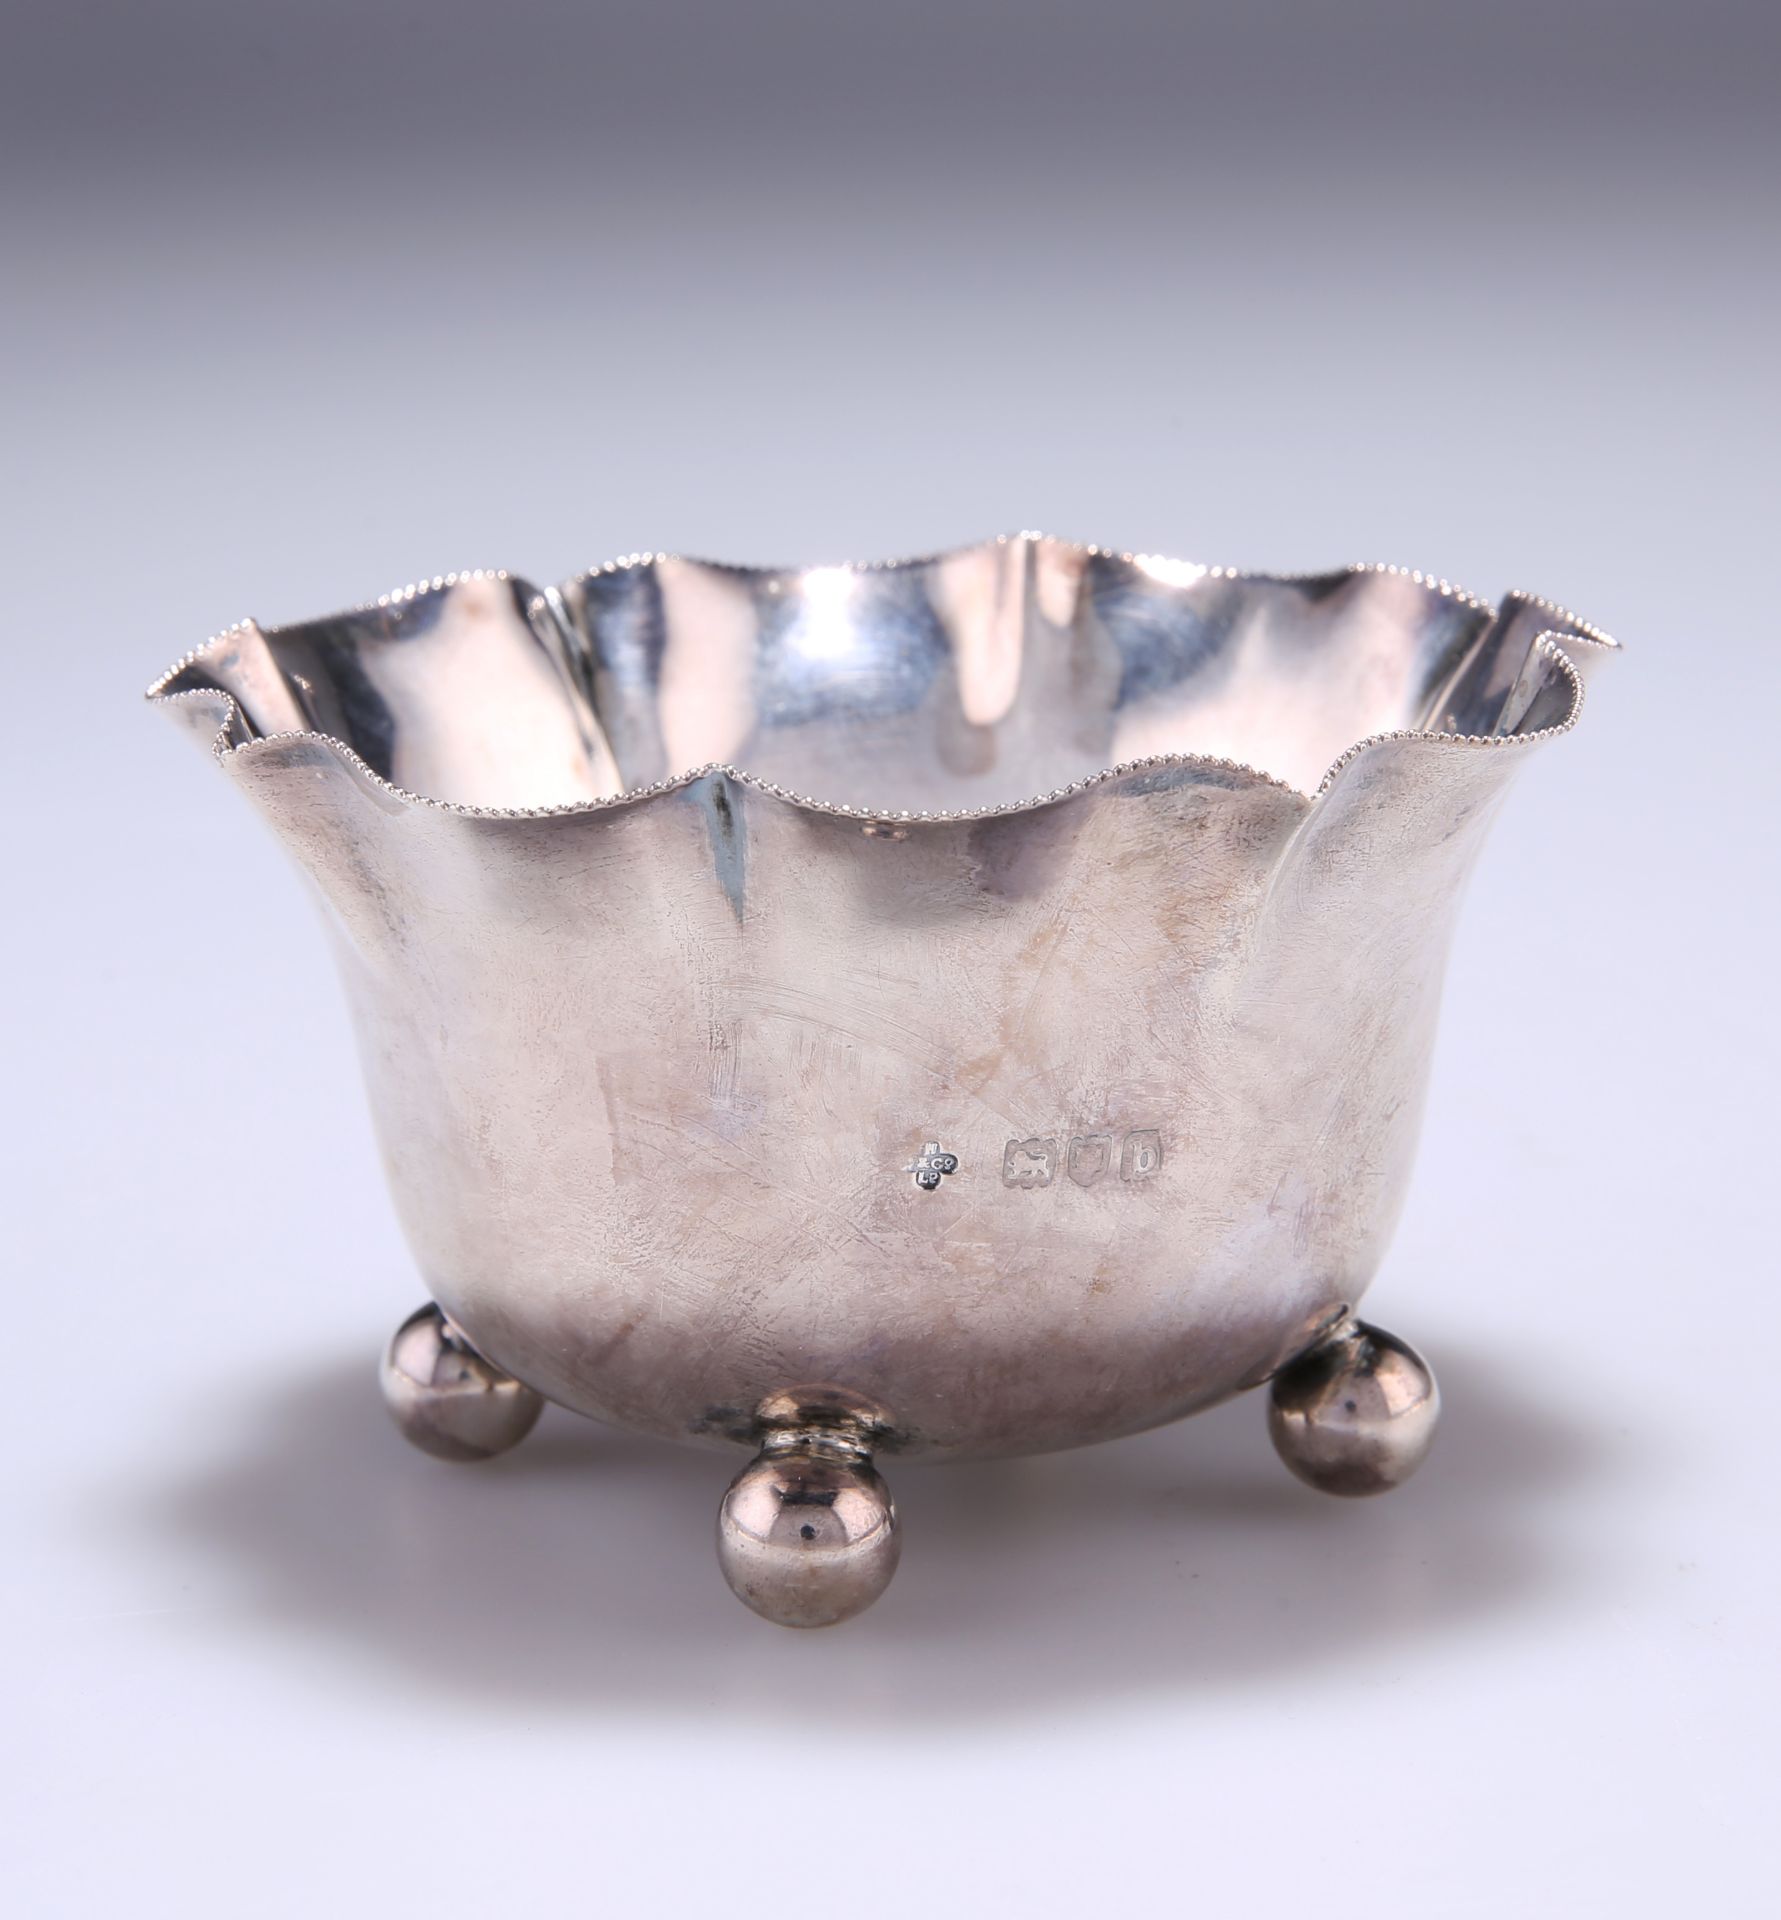 A VICTORIAN SILVER SUGAR BOWL, by Horace Woodward & Co Ltd, London 1897, with finely beaded wavy rim